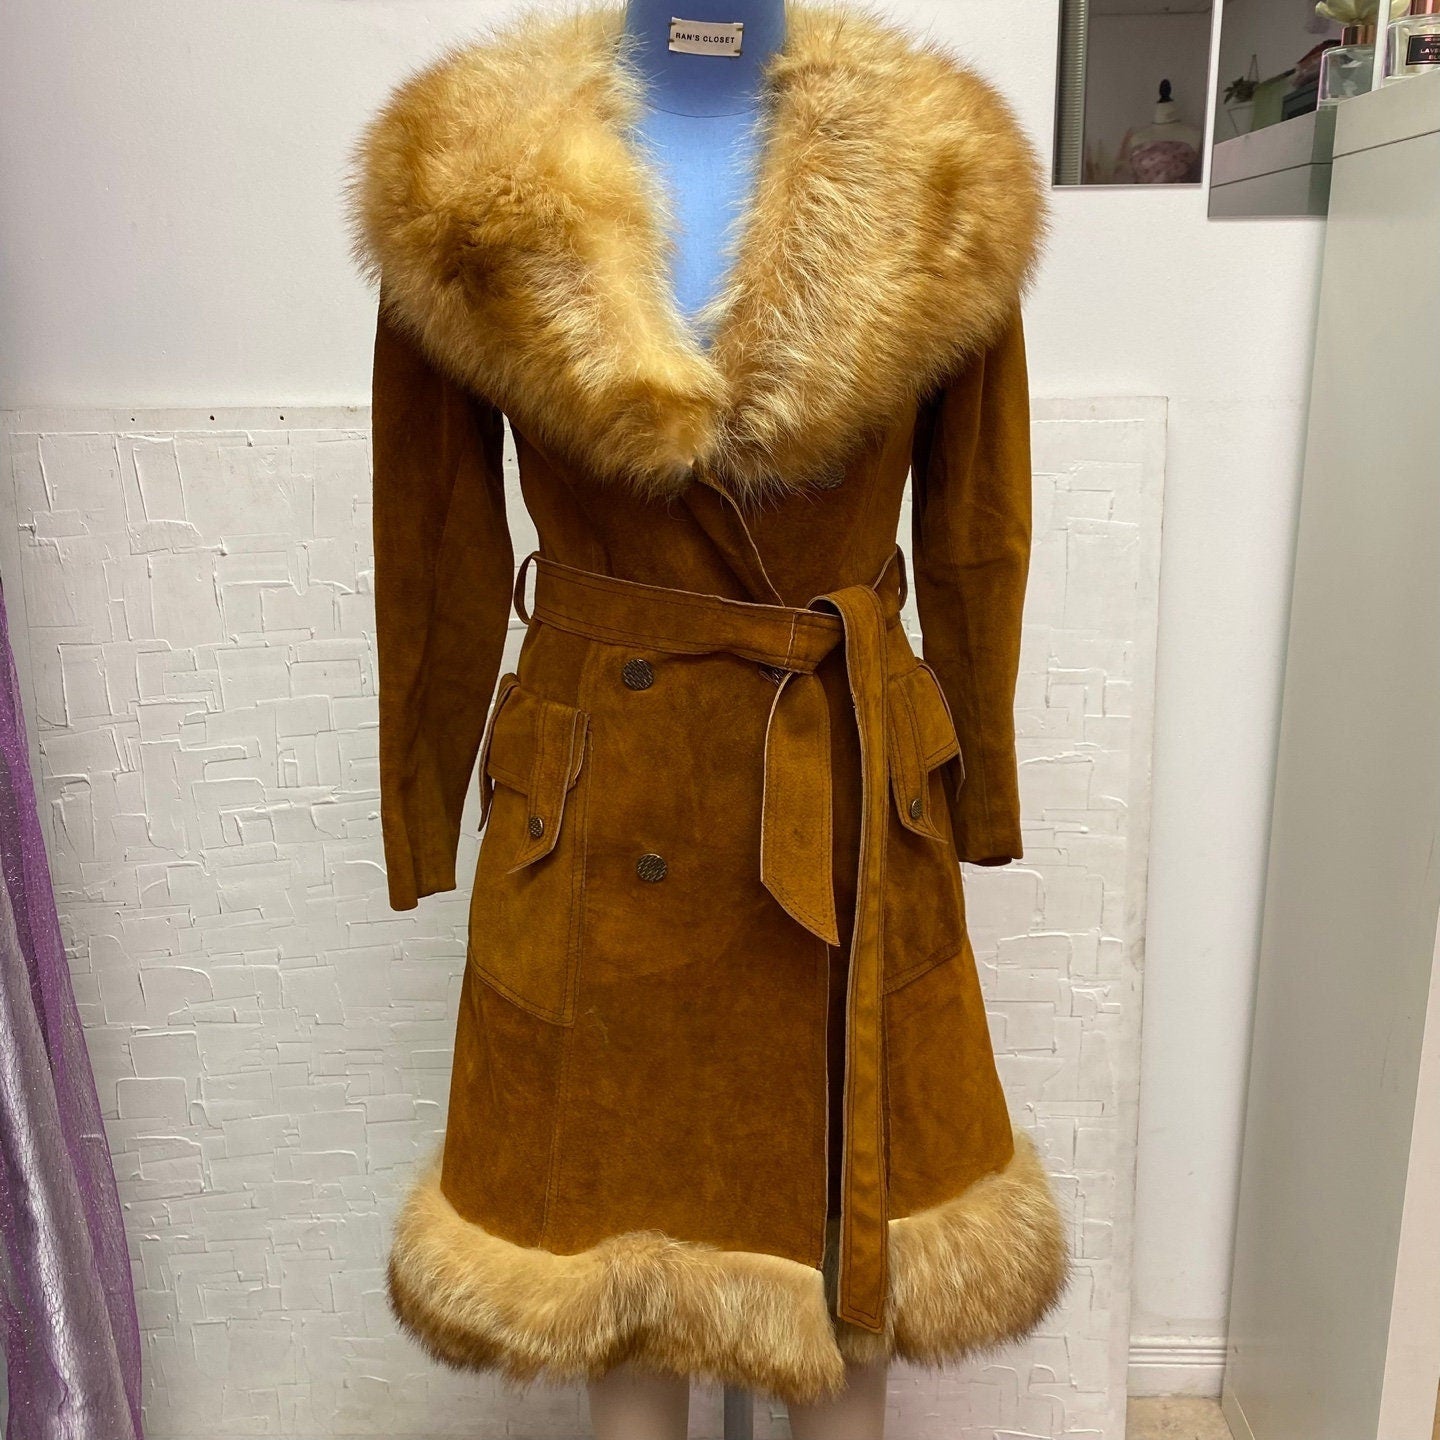 Vintage Leather Fur Lined Penny Lane Coat with Waist Belt | Portofino Fashions | Flap Pockets | Double Breasted | Brown | Size S | M-2002